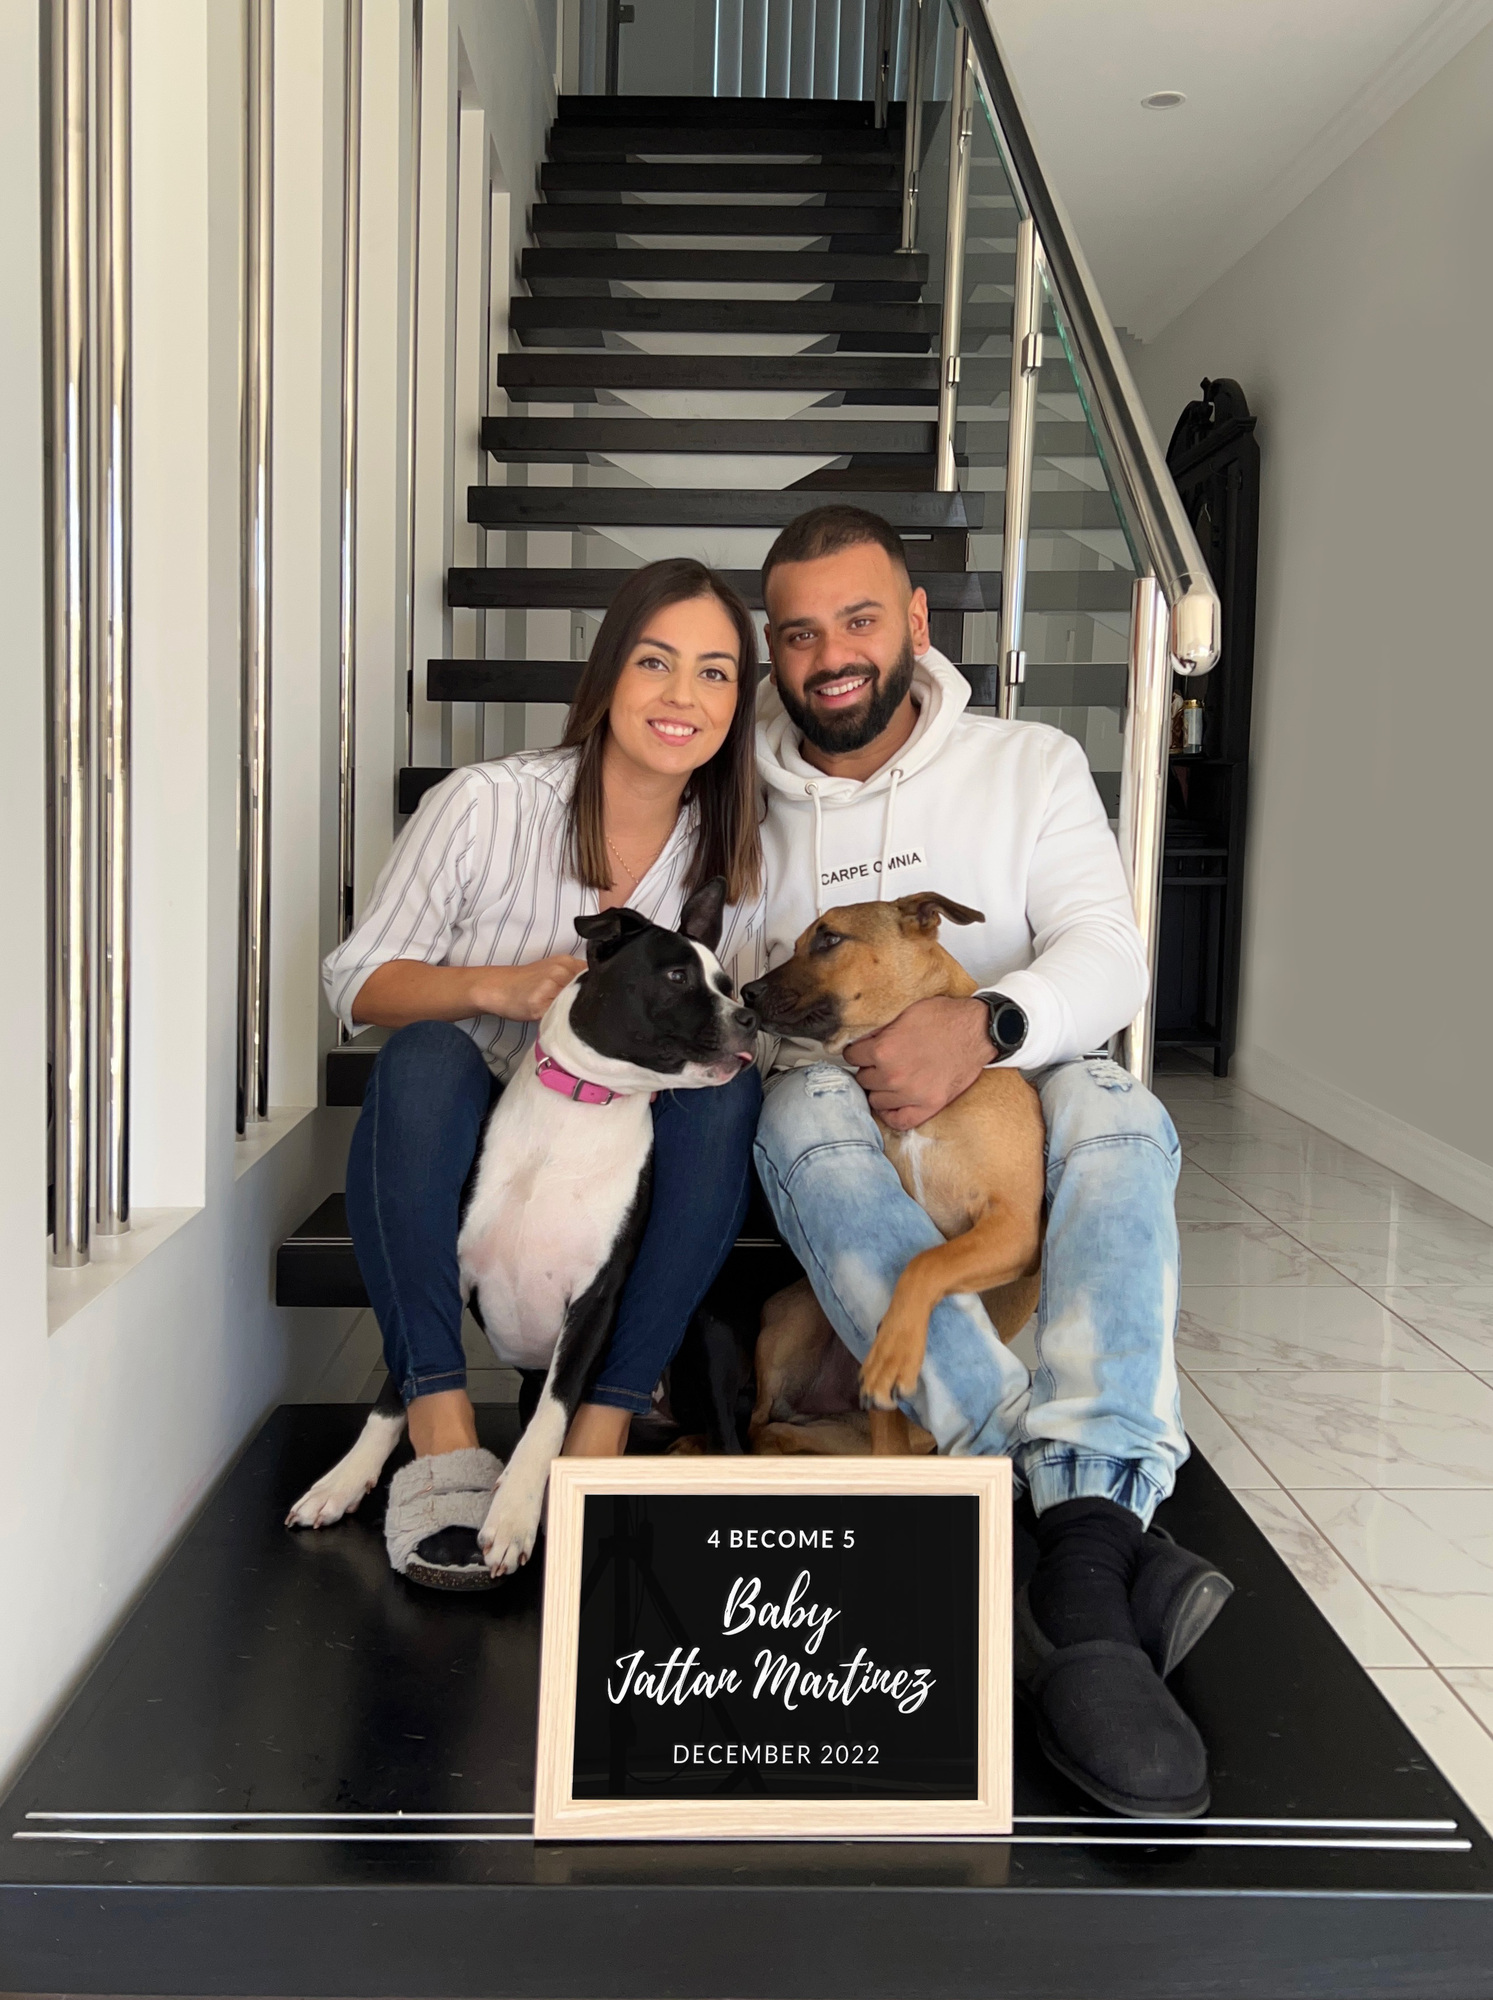 the couple and their two big dogs sitting on stairs with a pregnancy announcement sign